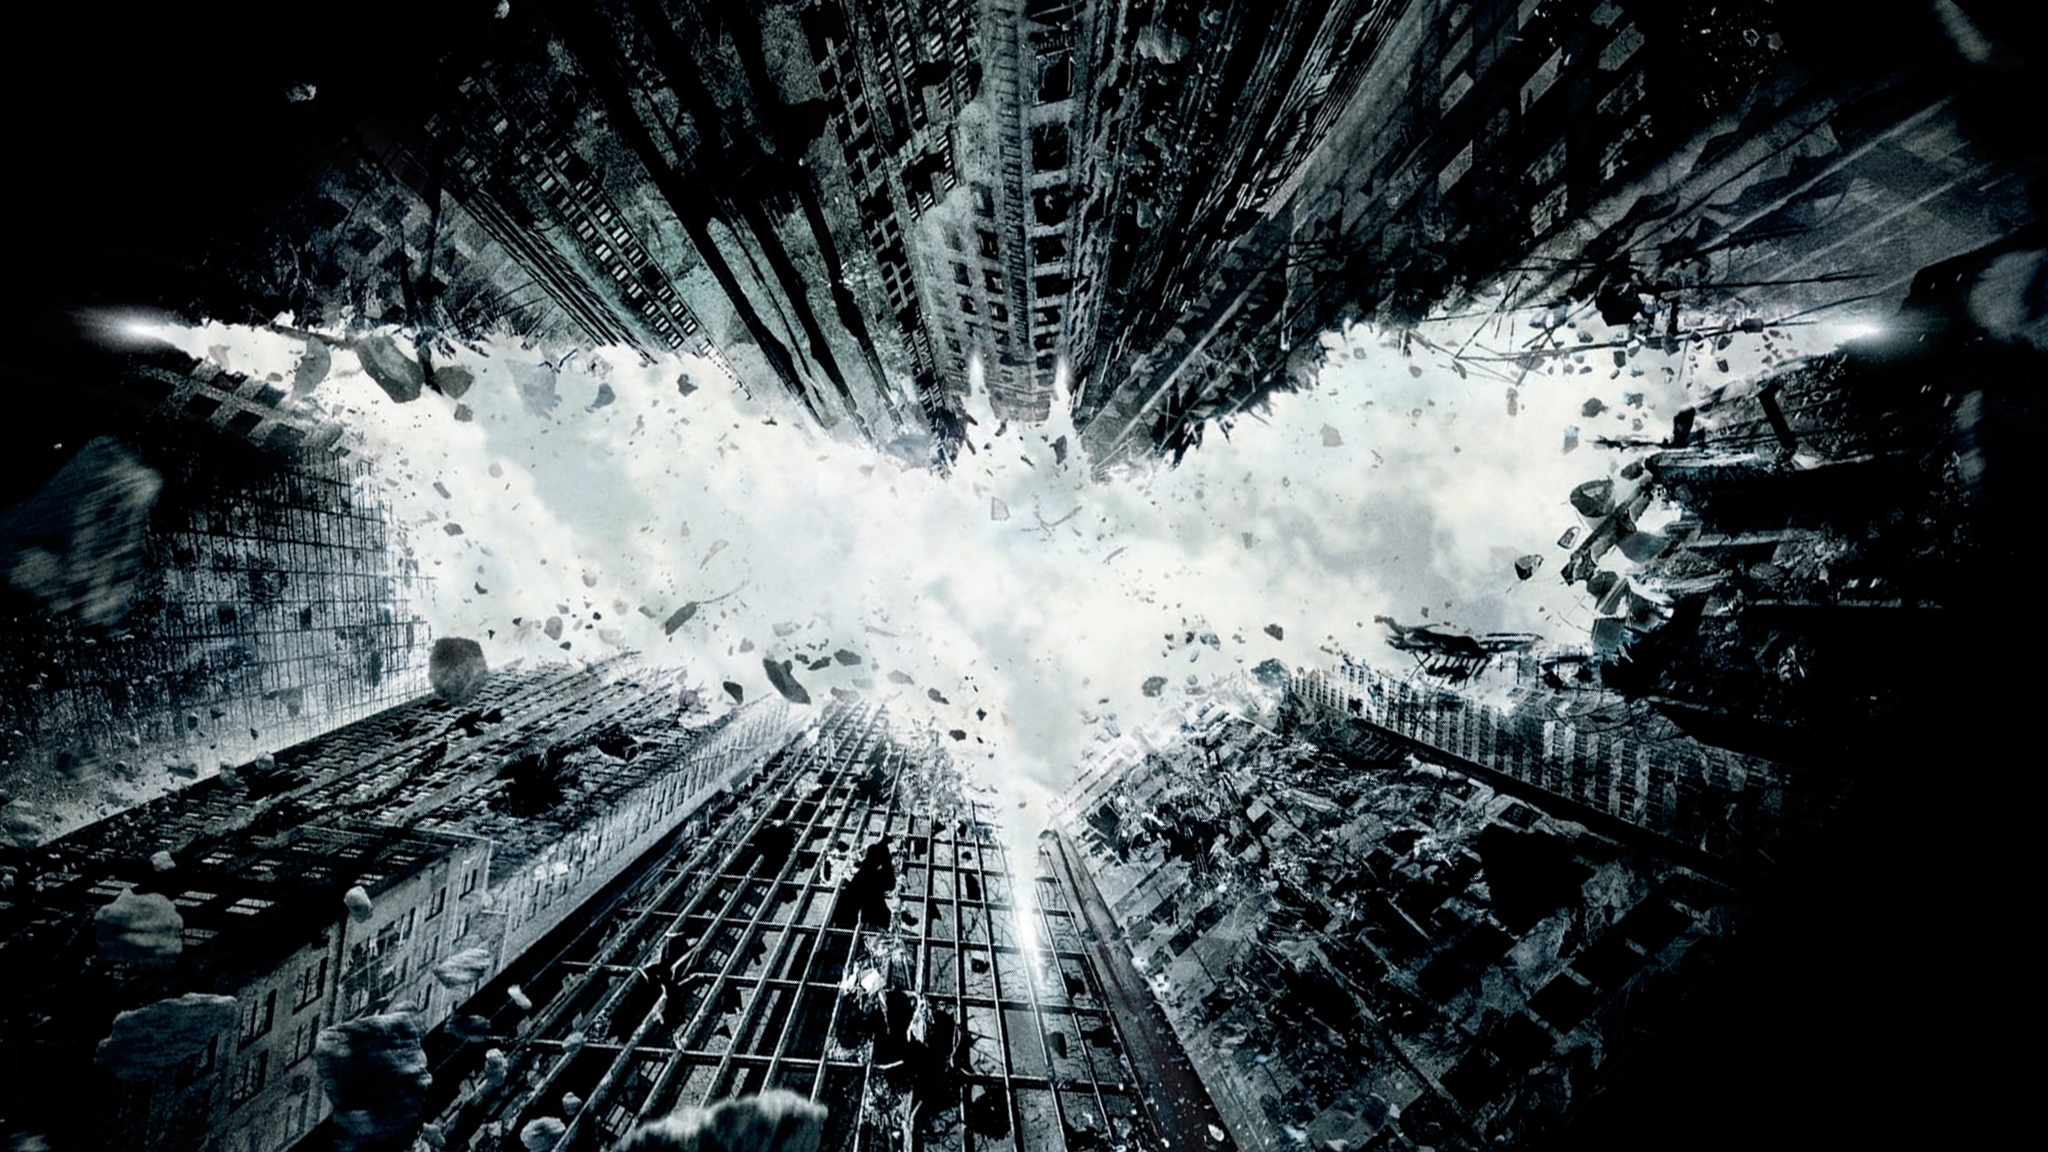 10 Top The Dark Knight Rises Wallpaper FULL HD 1080p For PC Background